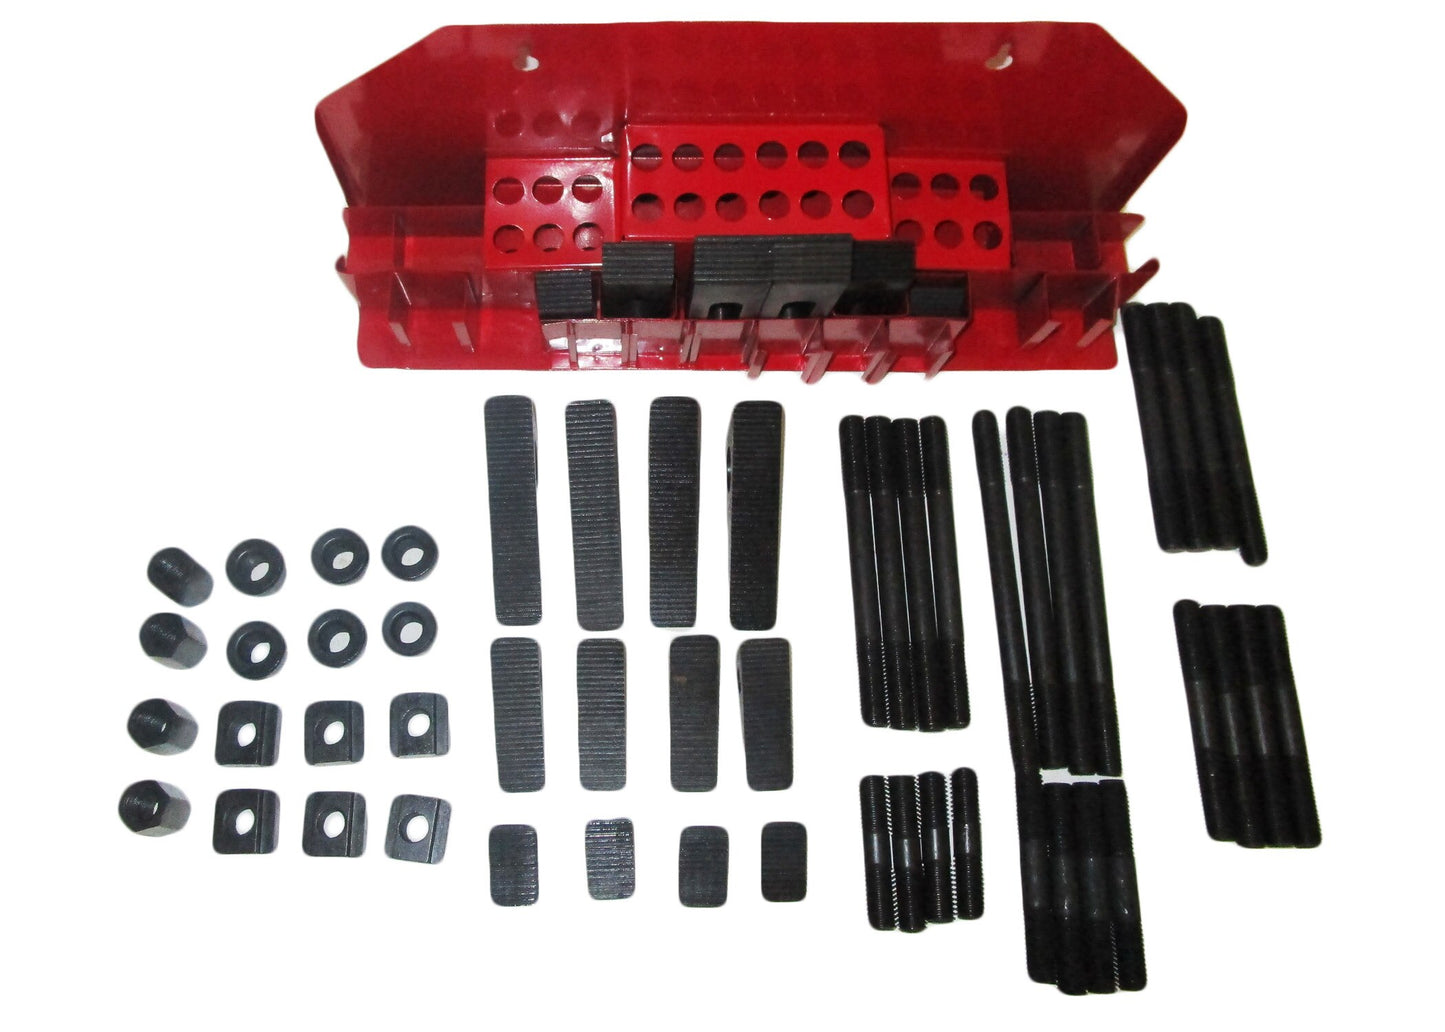 CK-58, 52-Piece Clamping Kit with Tray for 5/8" T-Slot